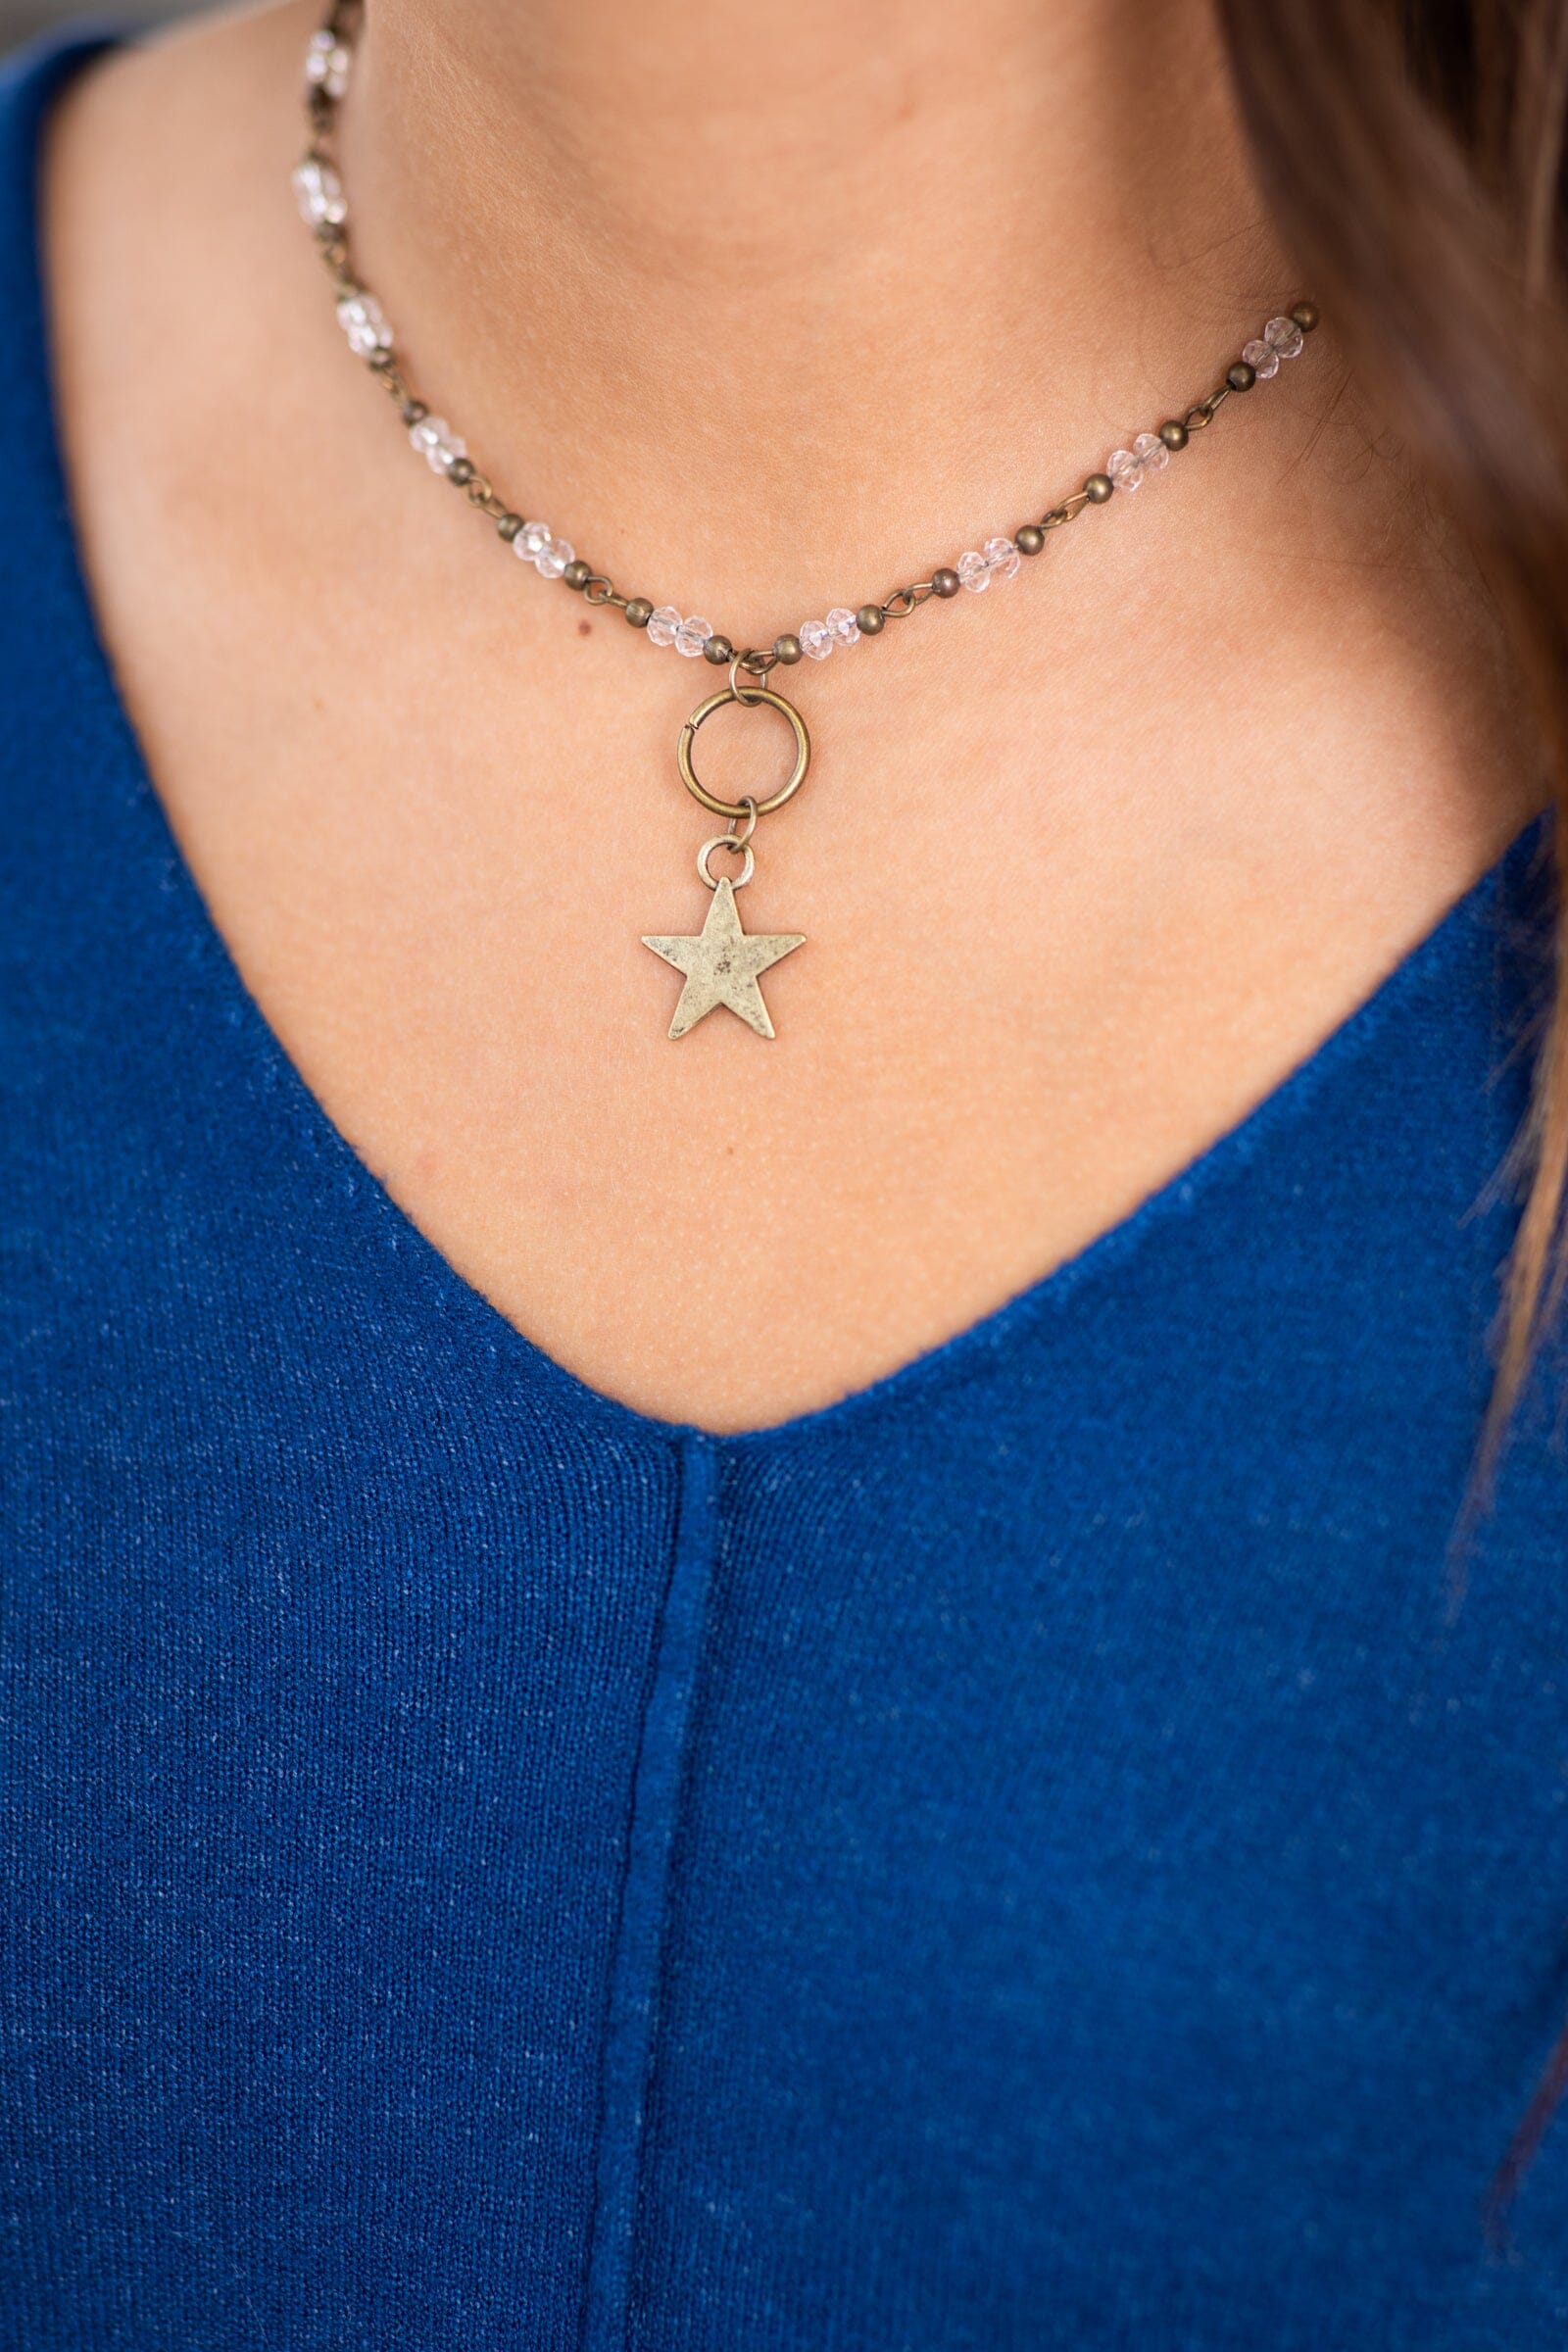 Bronze Beaded Necklace With Star Pendant - Filly Flair